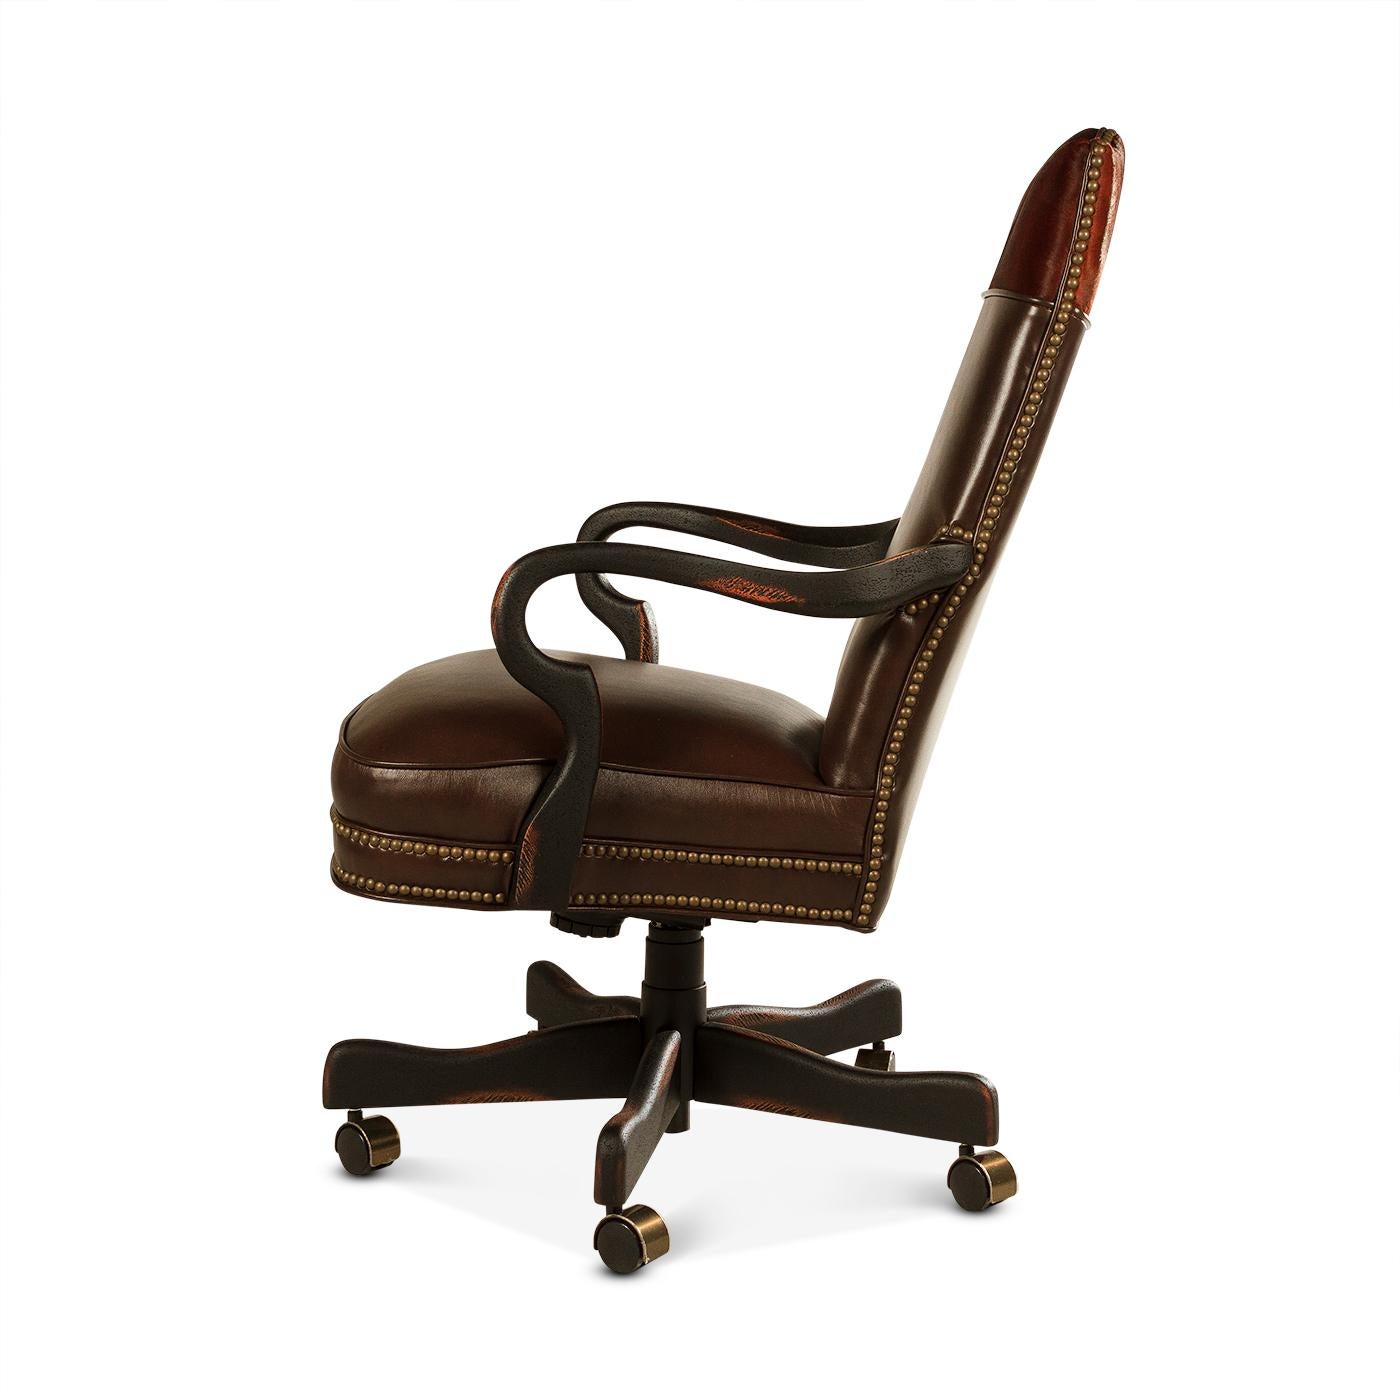 This one-of-a-kind Brown leather office chair is made with top grain high-quality leathers with an exotic hair on hyde and chocolate brown. The high back office chair has natural brass nailhead details and the shepherd's crook arm is finished in our